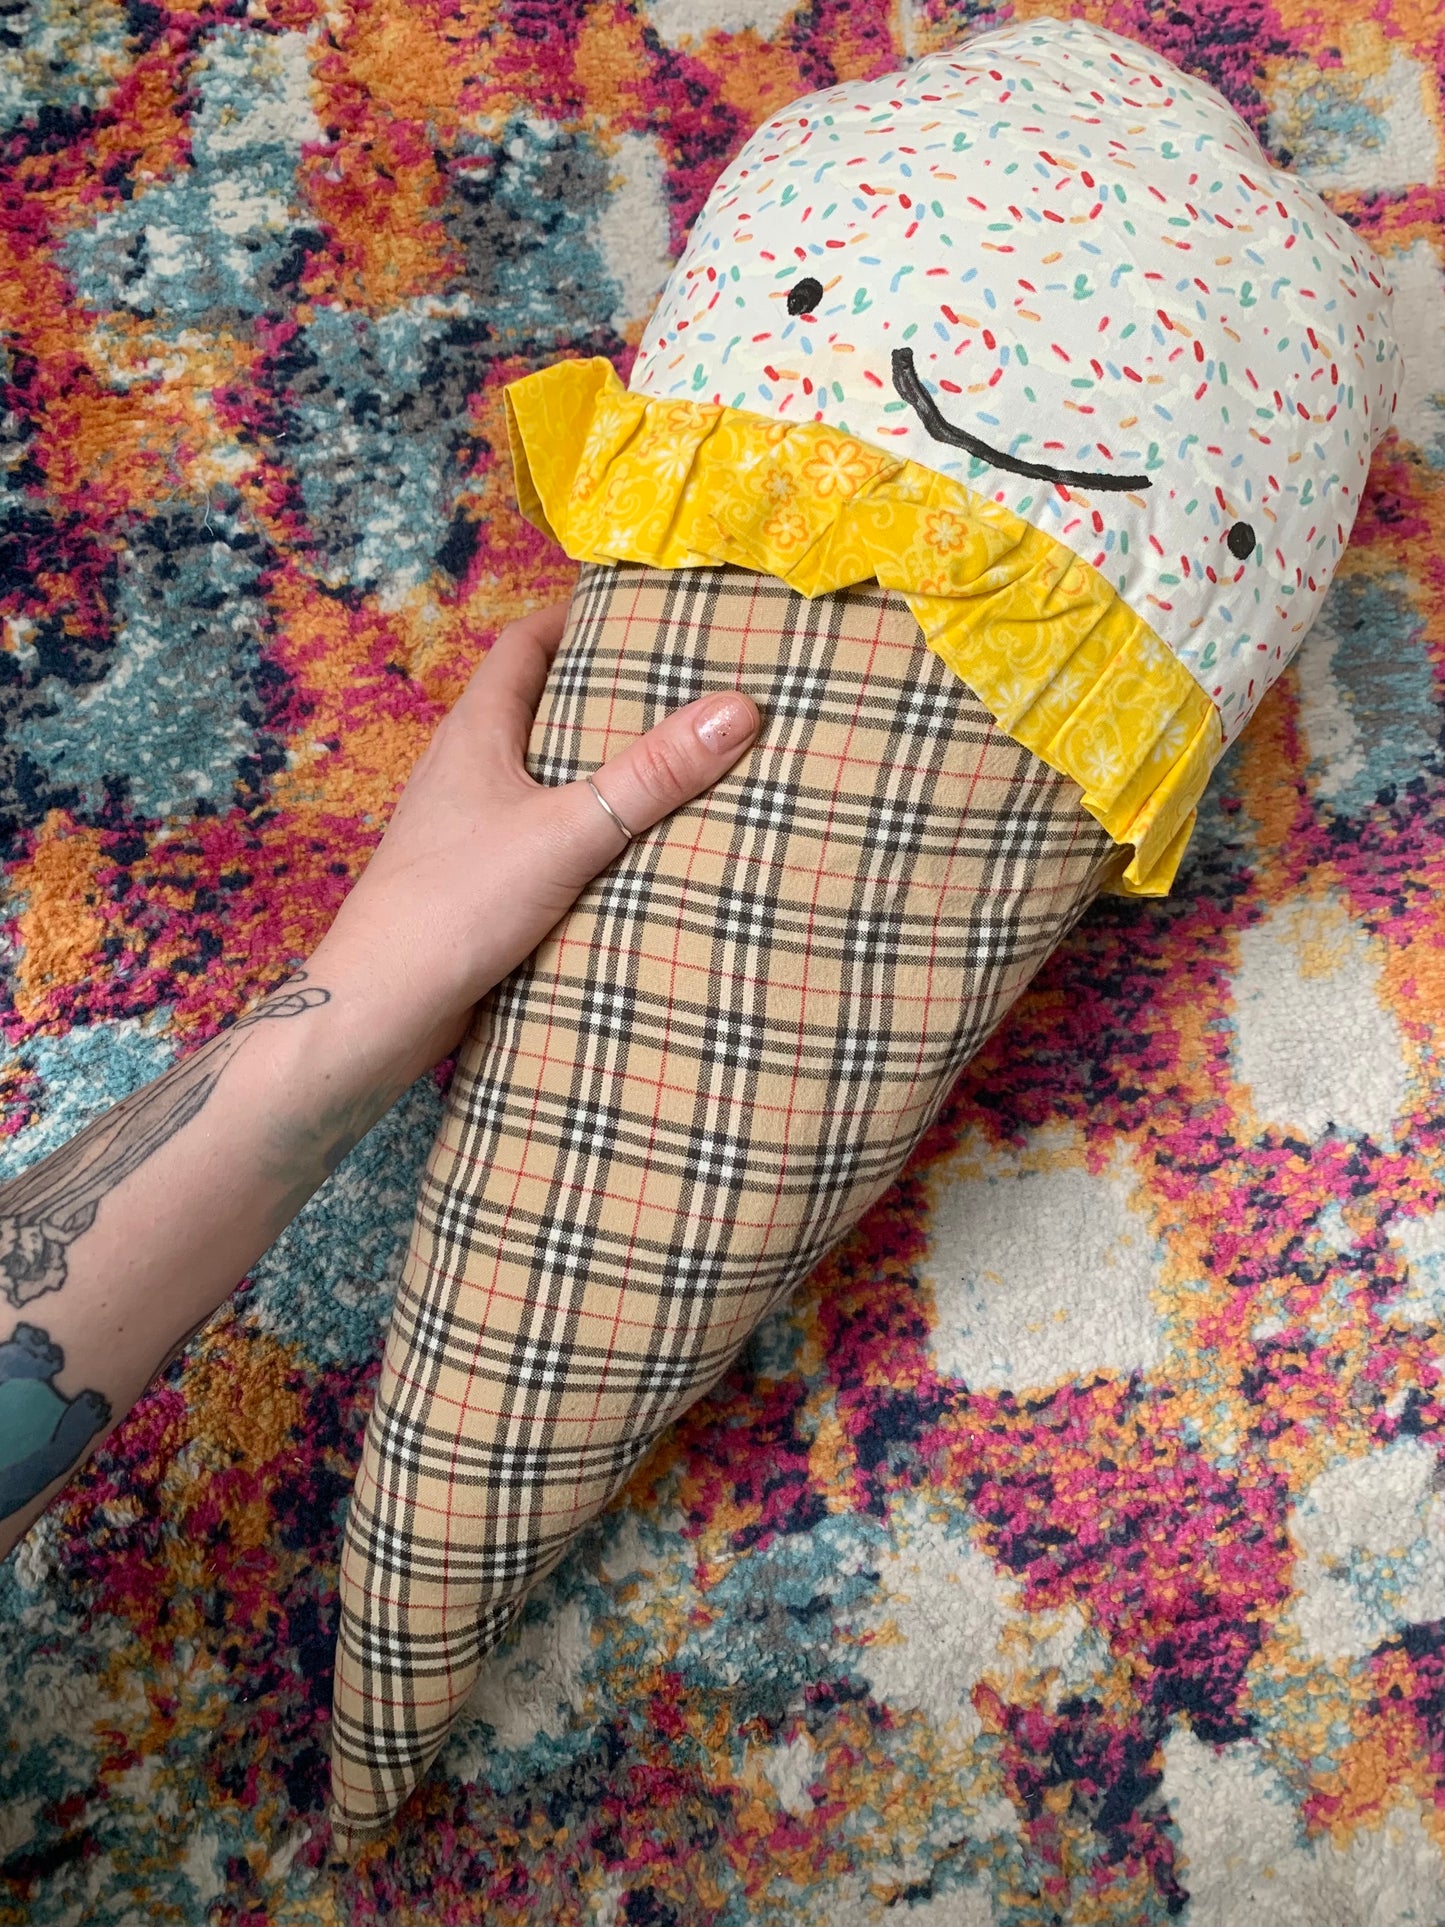 GIANT ice cream cone pillow, with white sprinkle and yellow floral fabric ice cream top, a happy face, and burberry plaid cone. held by a hand for scale